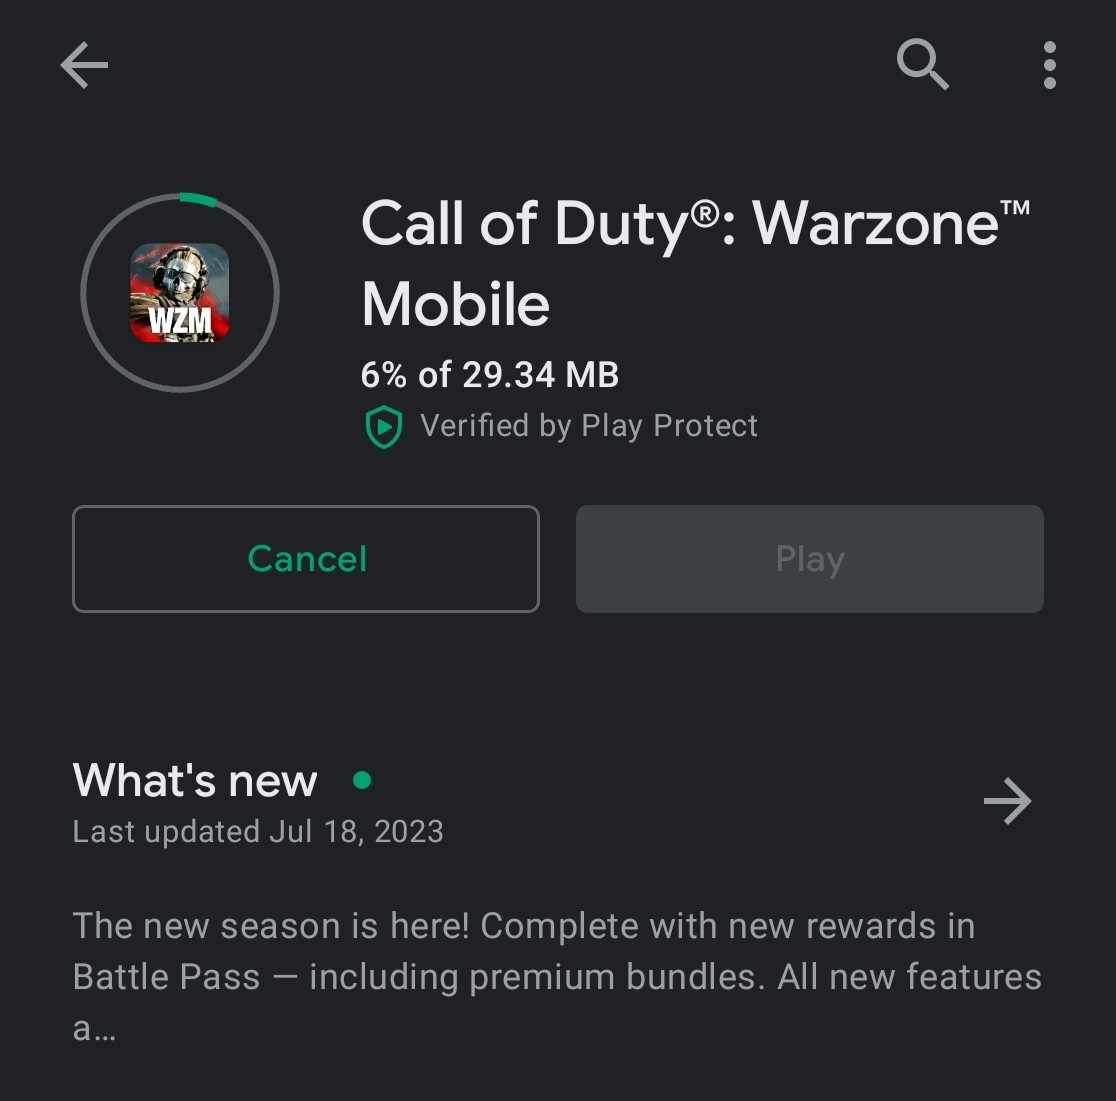 NEW WARZONE MOBILE UPDATE as of July 21, 2023 PHT. #warzonemobile 

- 30FPS in Lobby, in BR and MP (Android SD8Gen2 Device: RedMagic8Pro)
- 60FPS in IOS Devices
- Playlist Updated: QUADS Battle Royale, Quads Clash and TRIOS Mobile Royale

Will update this thread.